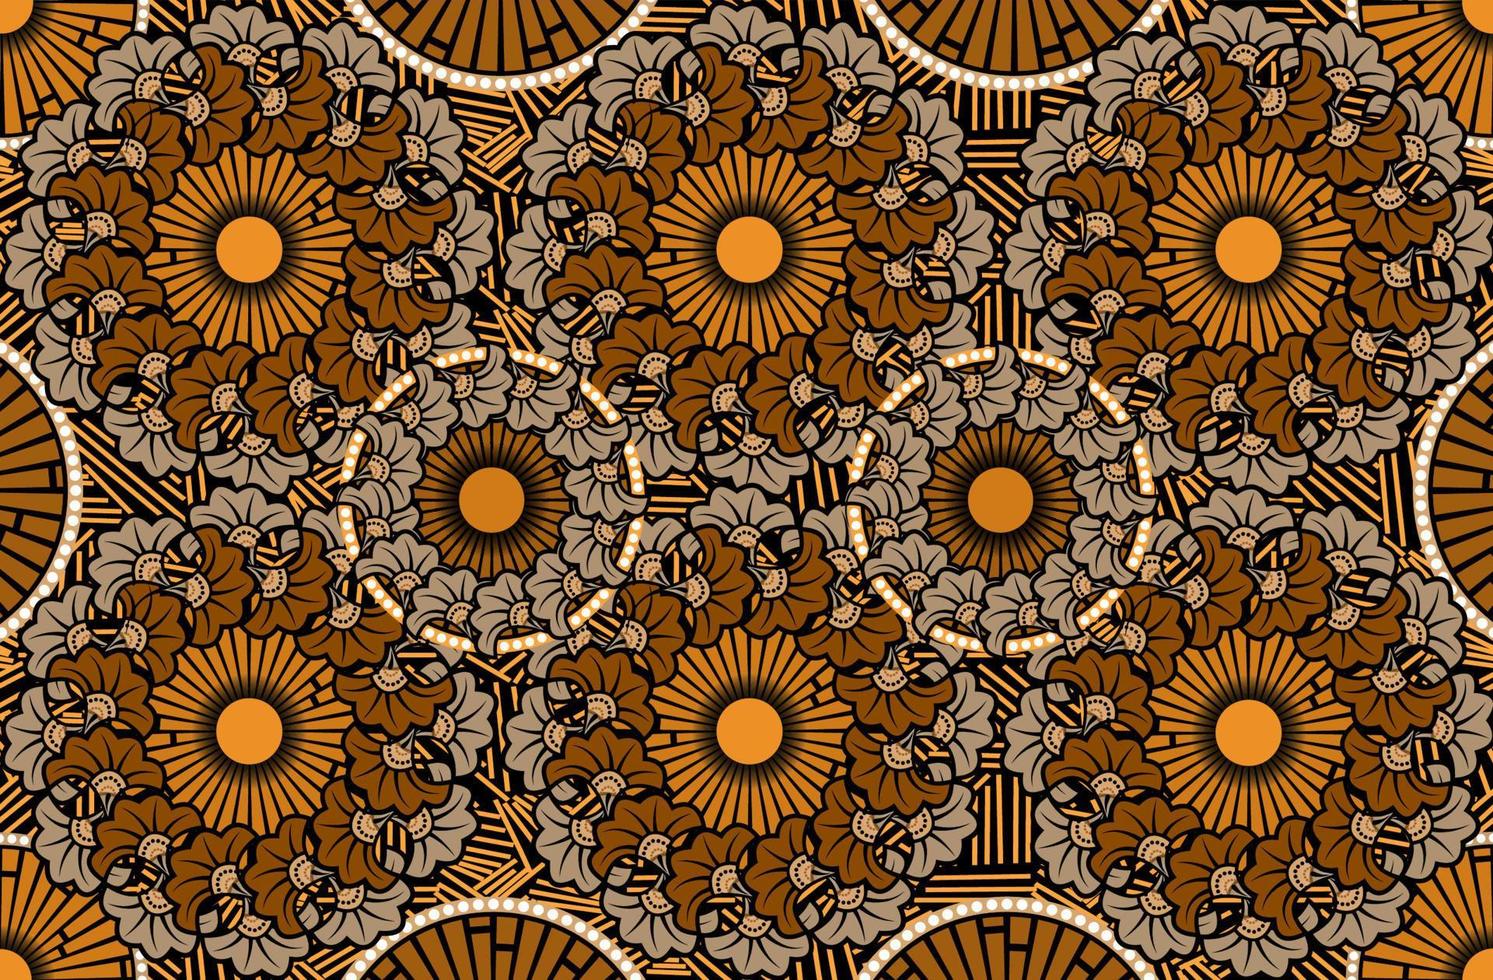 African Wax Print fabric, Ethnic handmade ornament fashion design, Afro Ethnic flowers and tribal motifs geometric elements. Vector brown color texture, Africa textile Ankara style background